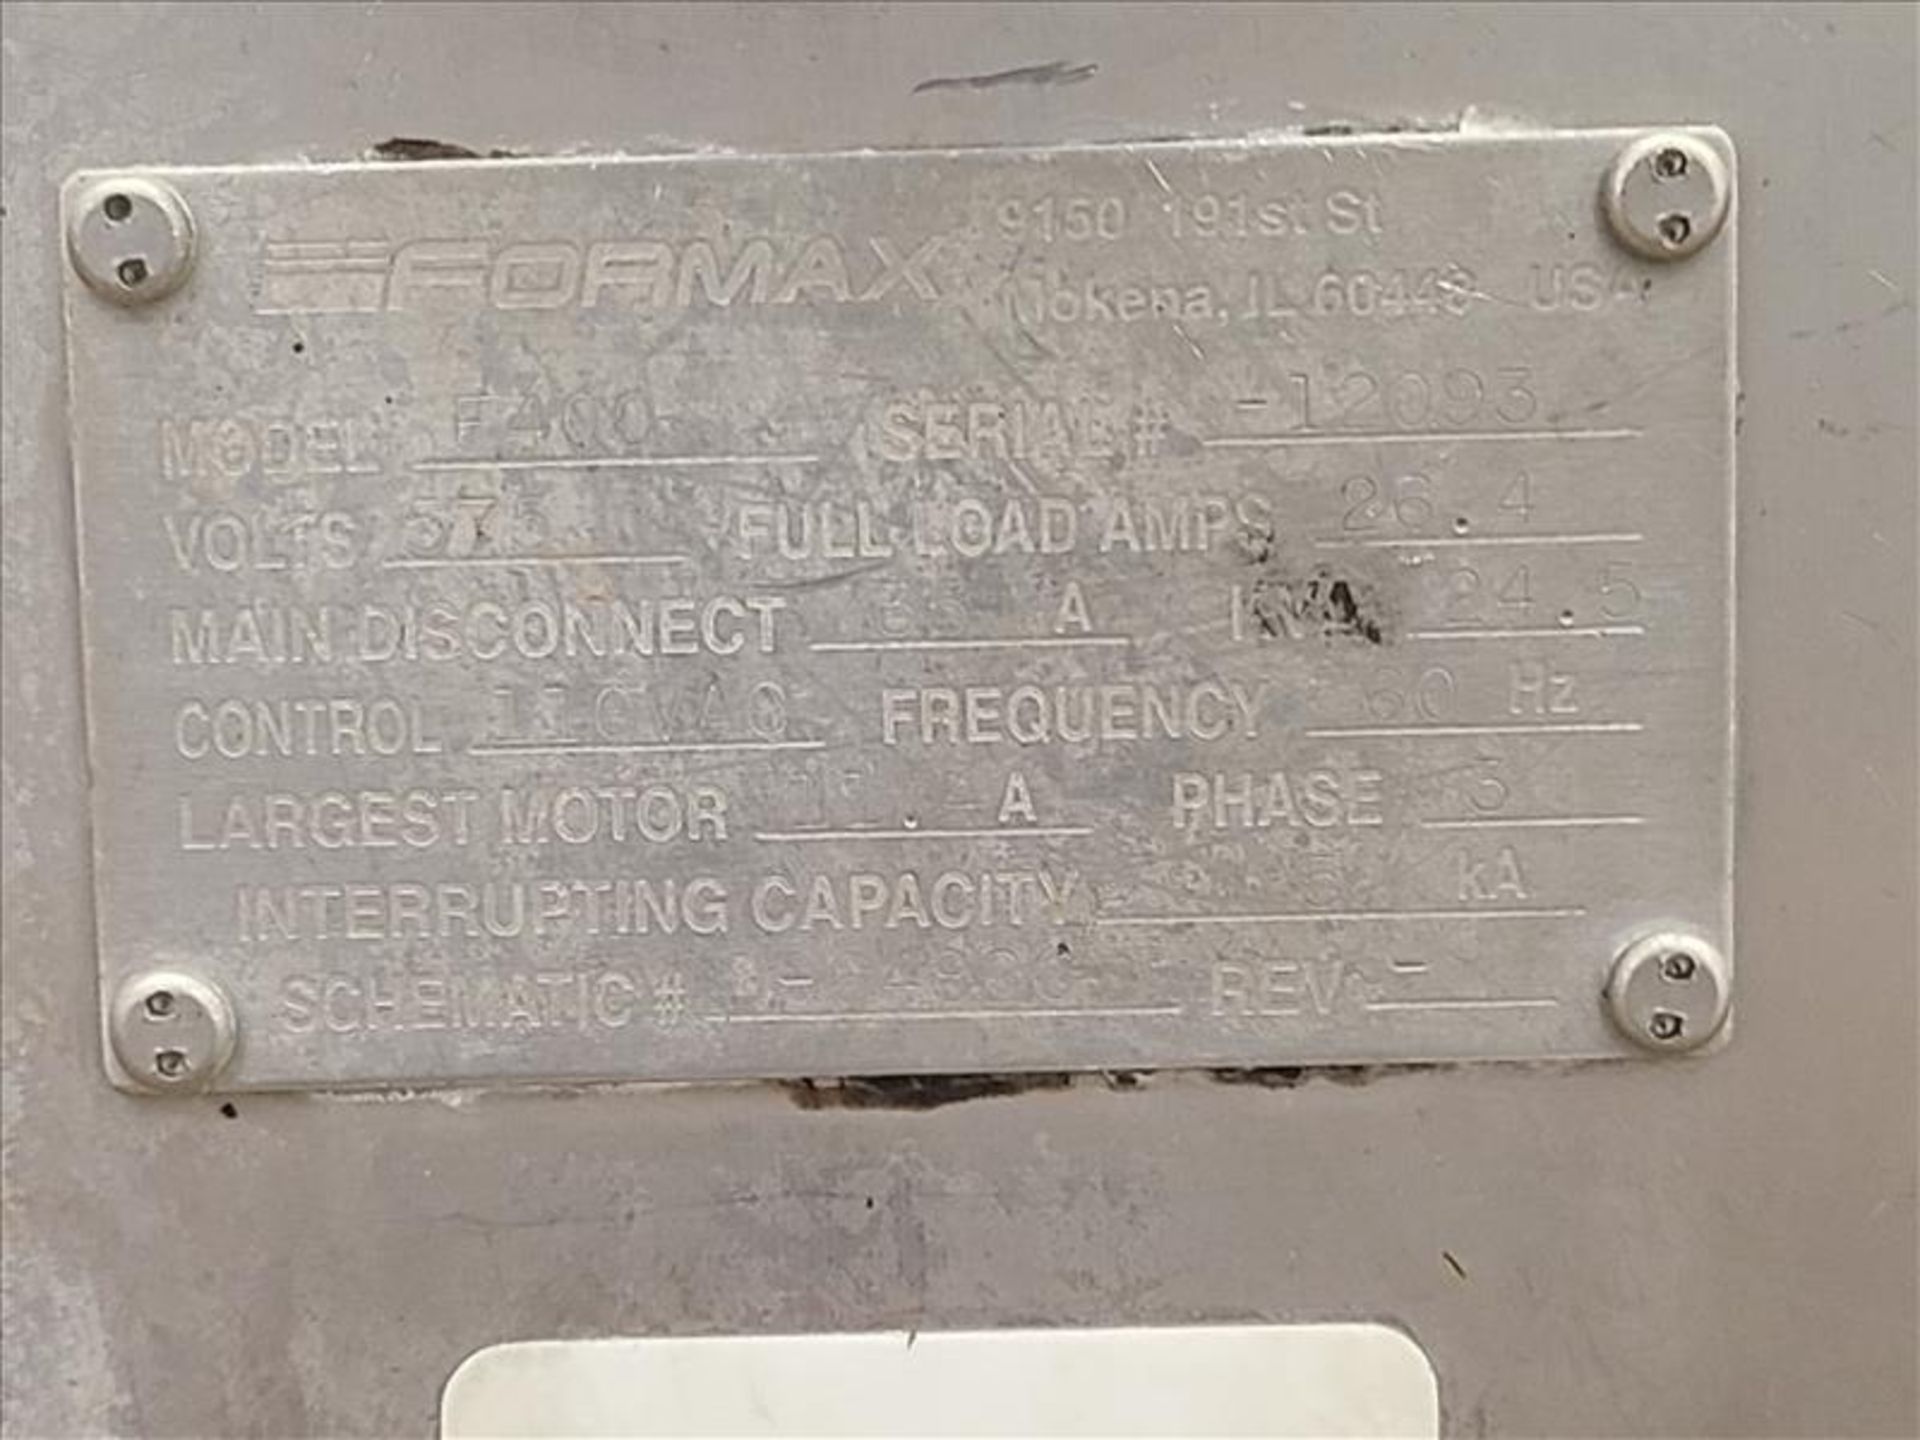 Formax Forming Machine, mod. F400, ser. no. 12093, 575 volts, 3 phase, 60 Hz [Line 3] - Image 3 of 4